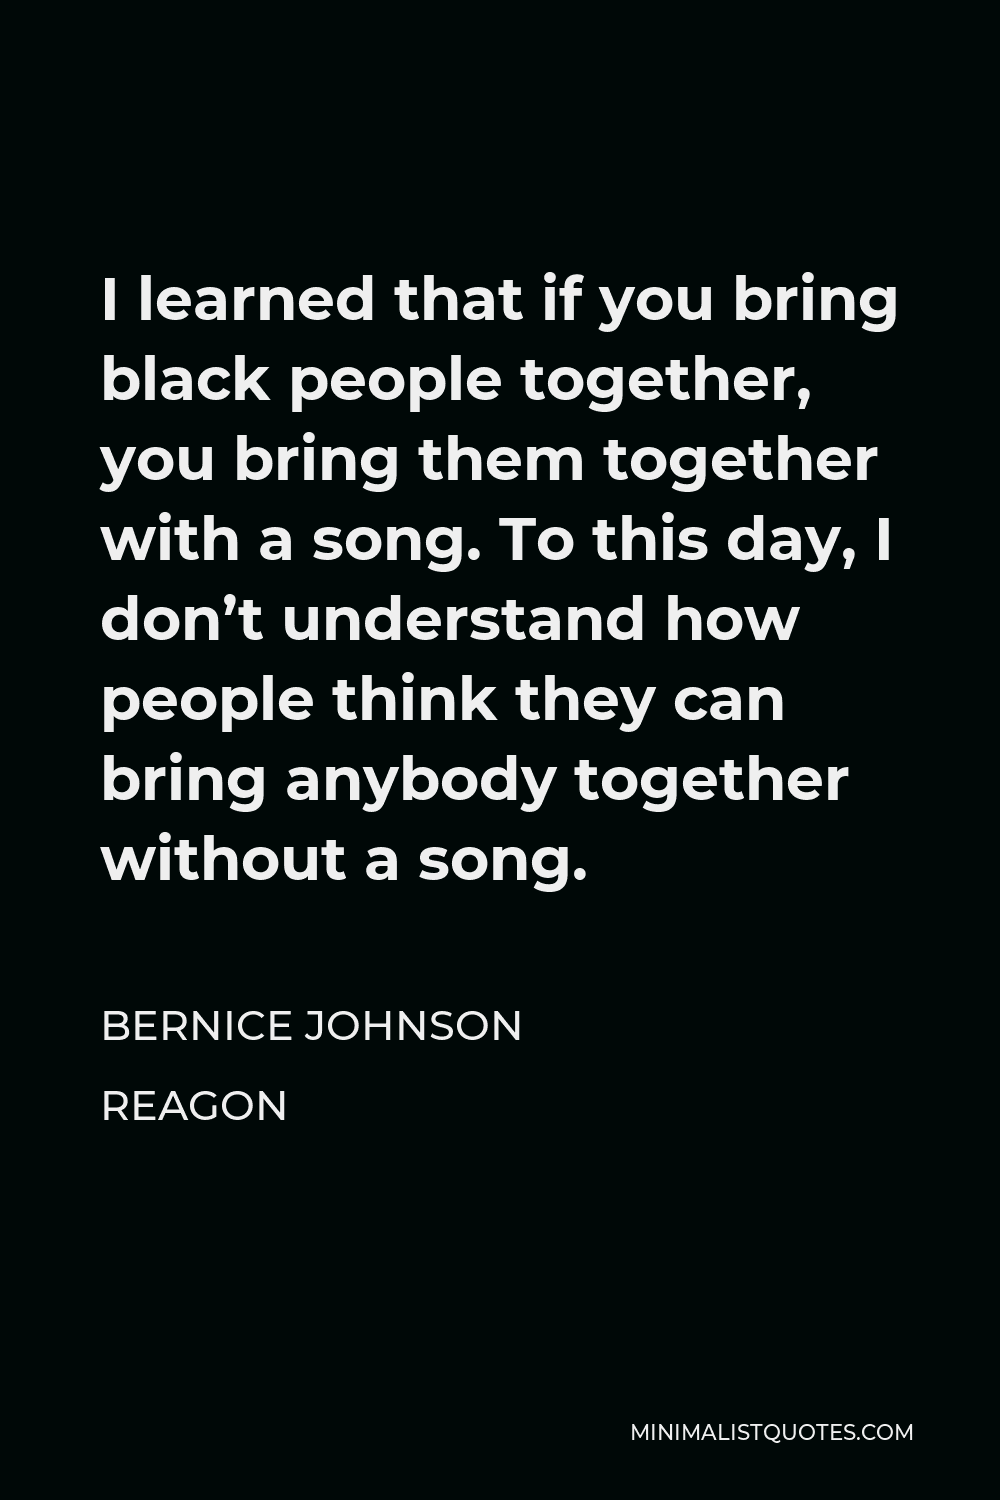 Bernice Johnson Reagon Quote - I learned that if you bring black people together, you bring them together with a song. To this day, I don’t understand how people think they can bring anybody together without a song.